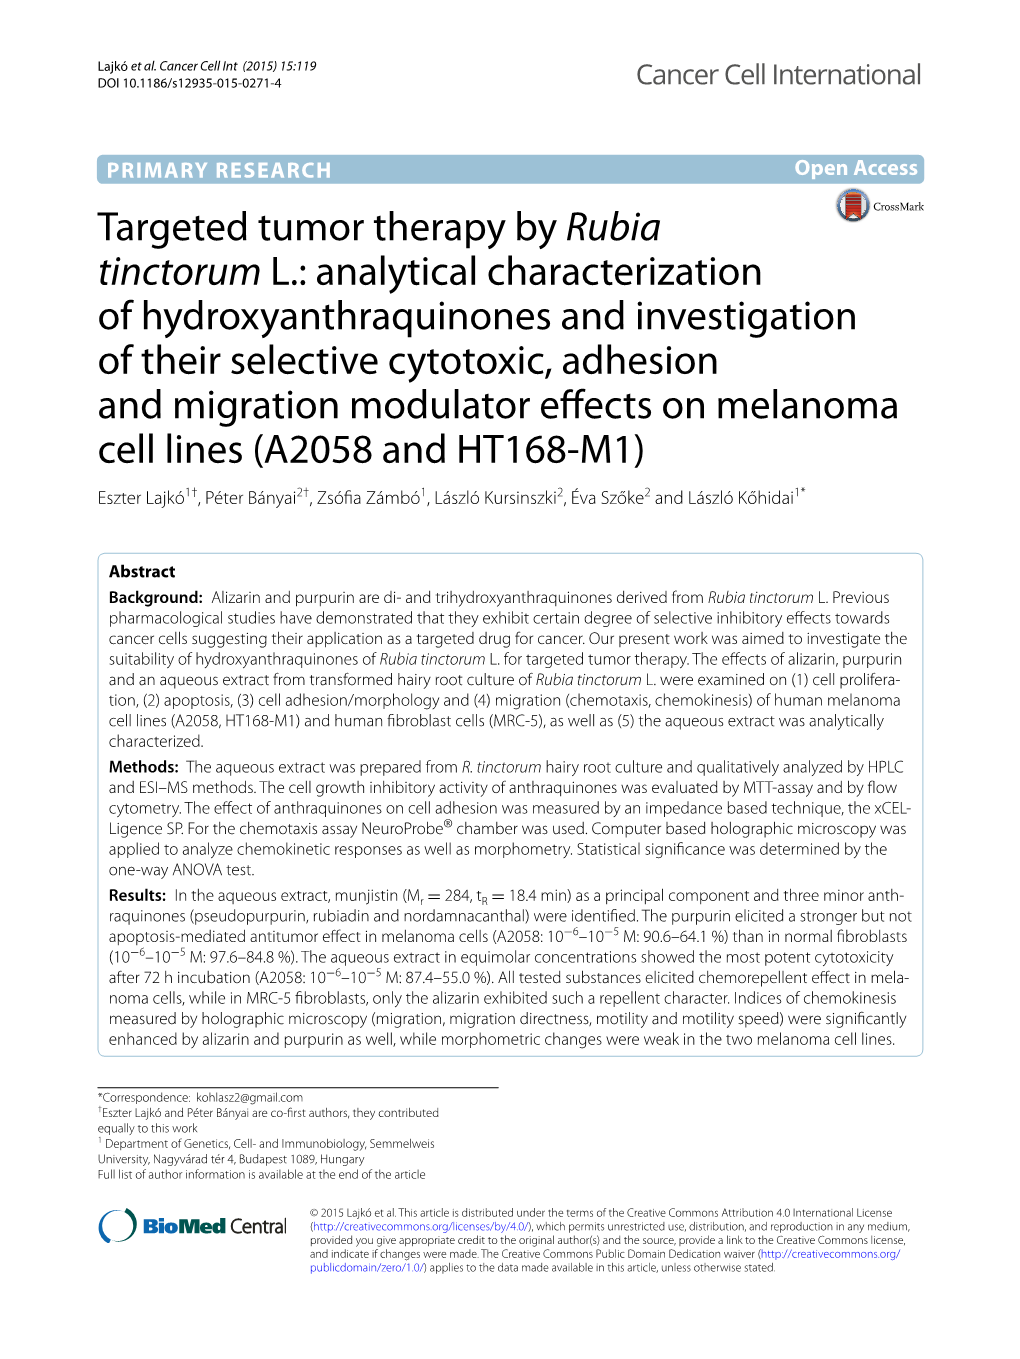 Targeted Tumor Therapy by Rubia Tinctorum L